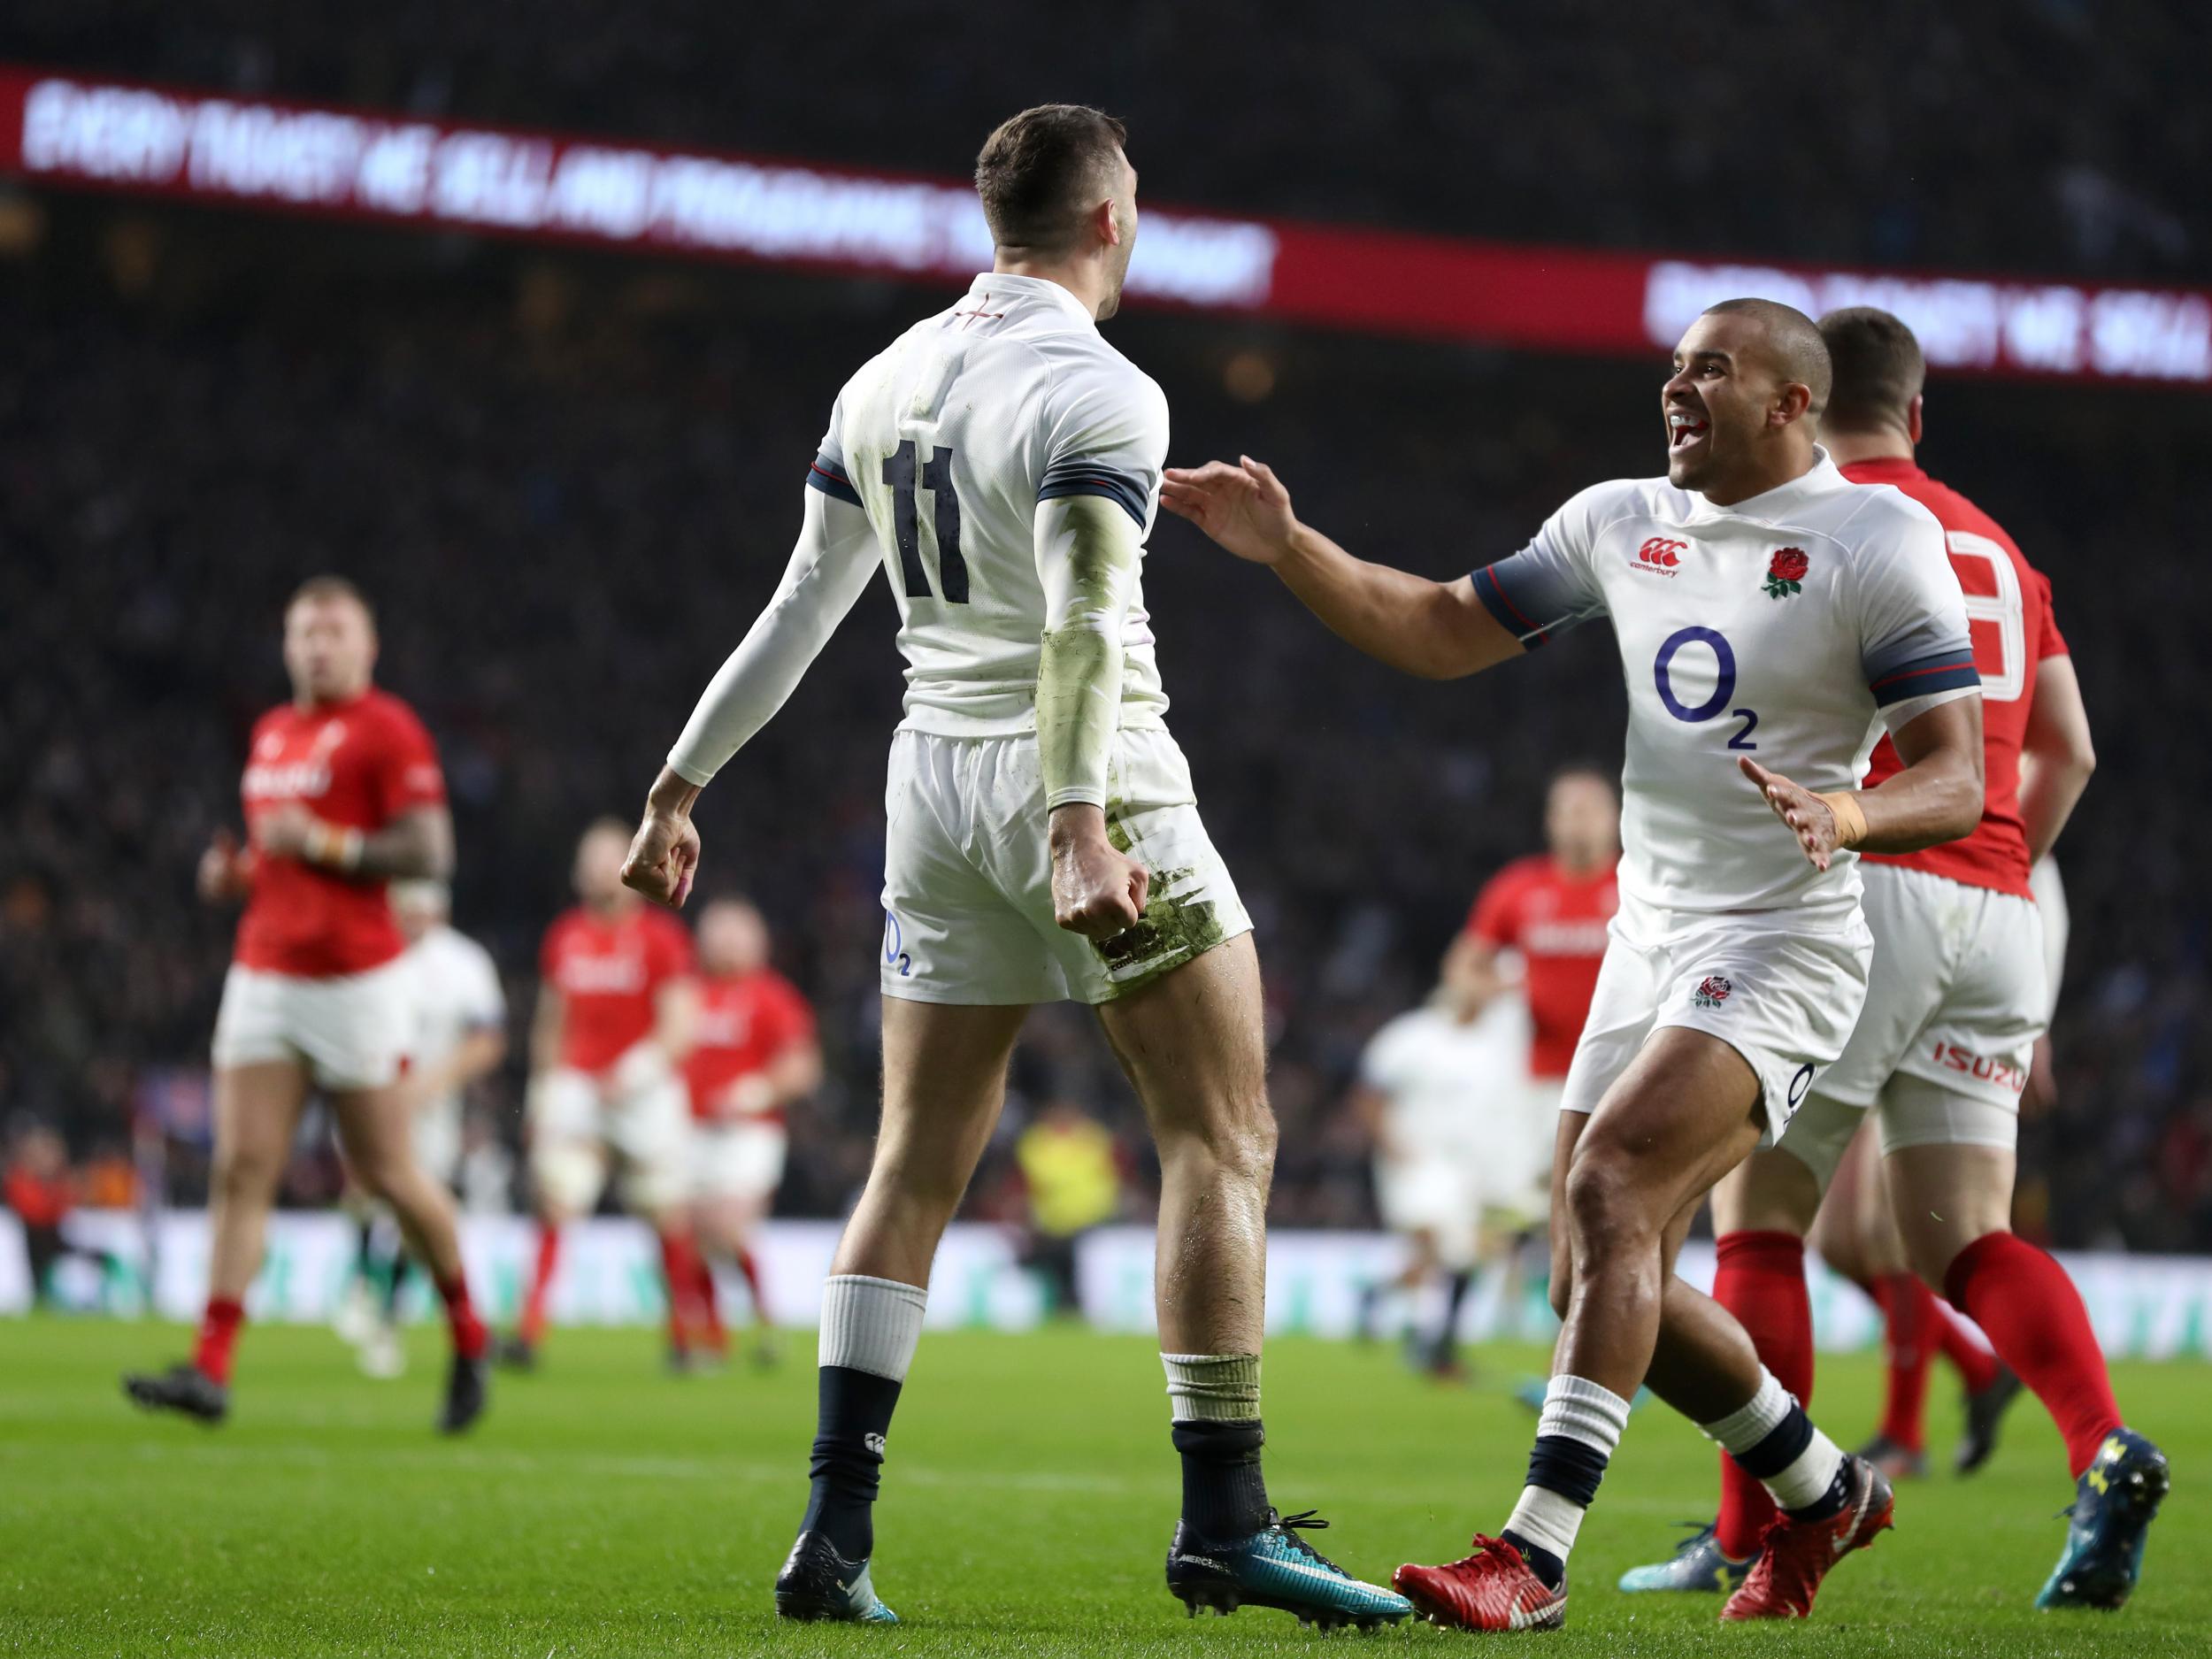 England failed to score for 60 minutes but still won